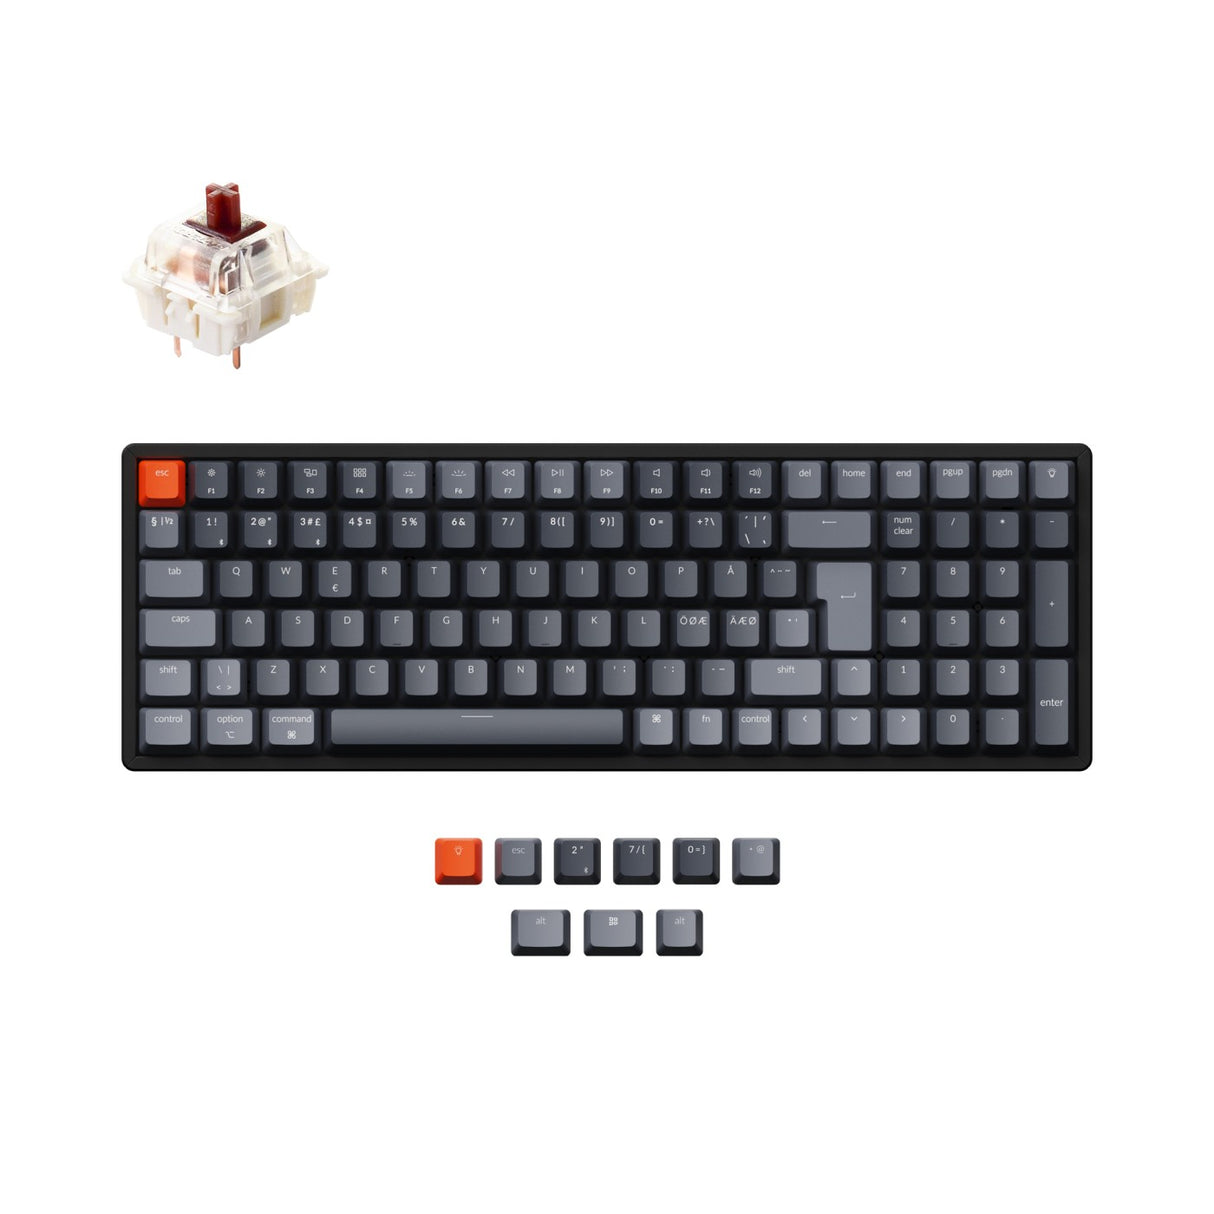 Keychron K4 Wireless Mechanical Keyboard Nordic ISO Layout Version 2 Gateron Brown Switch RGB Backlight Hot Swappable